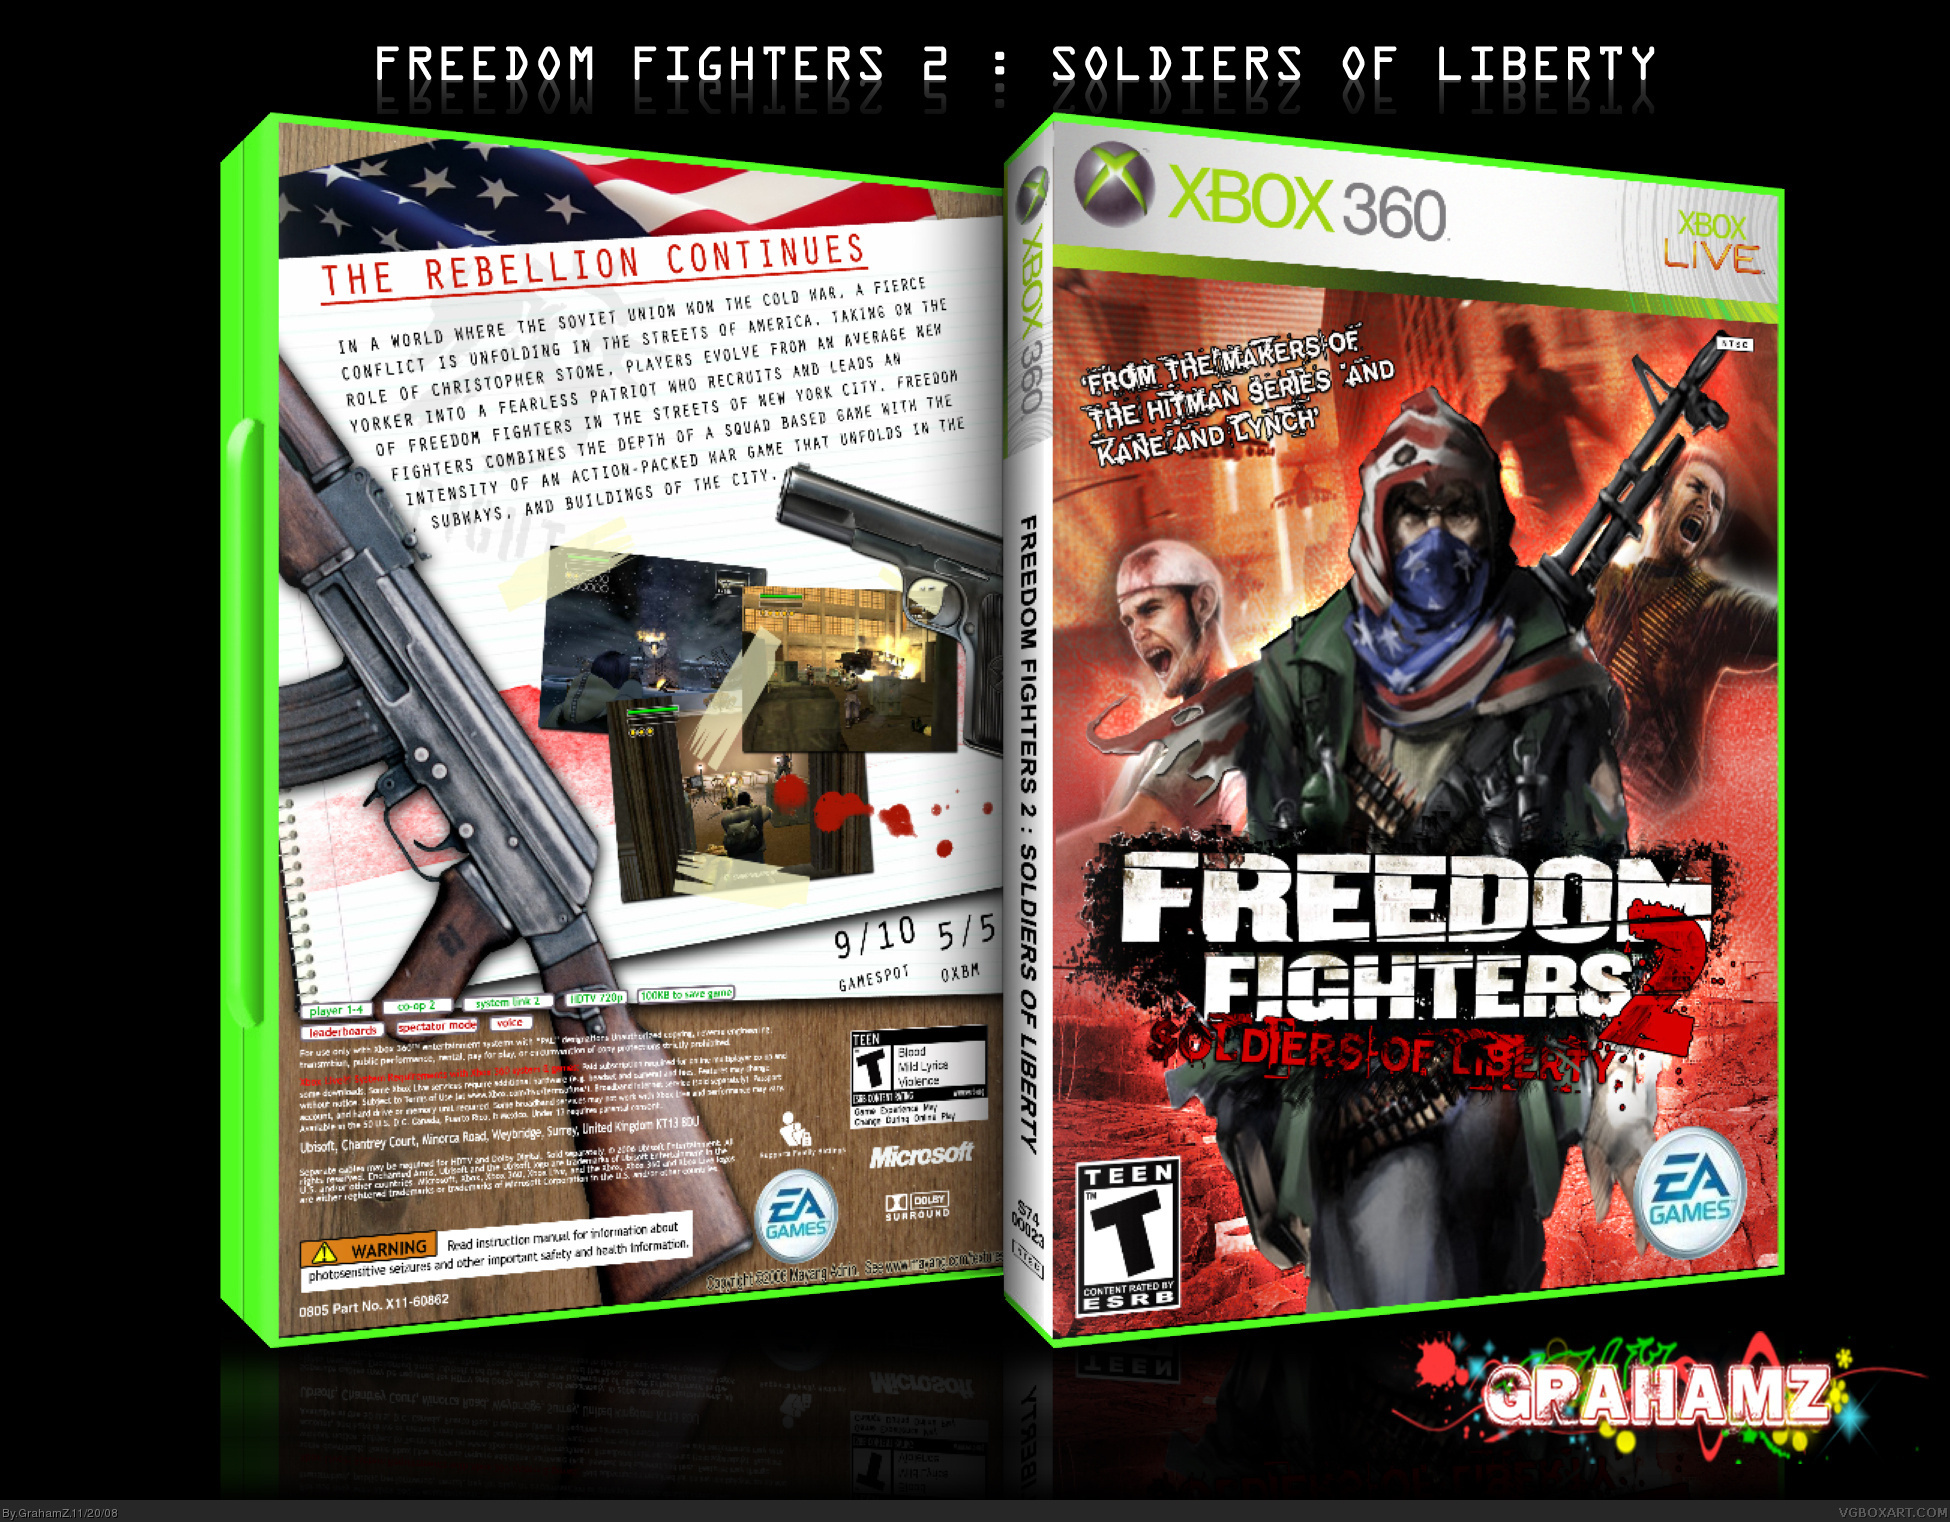 Freedom Fighters 2: Soldiers of Liberty box cover